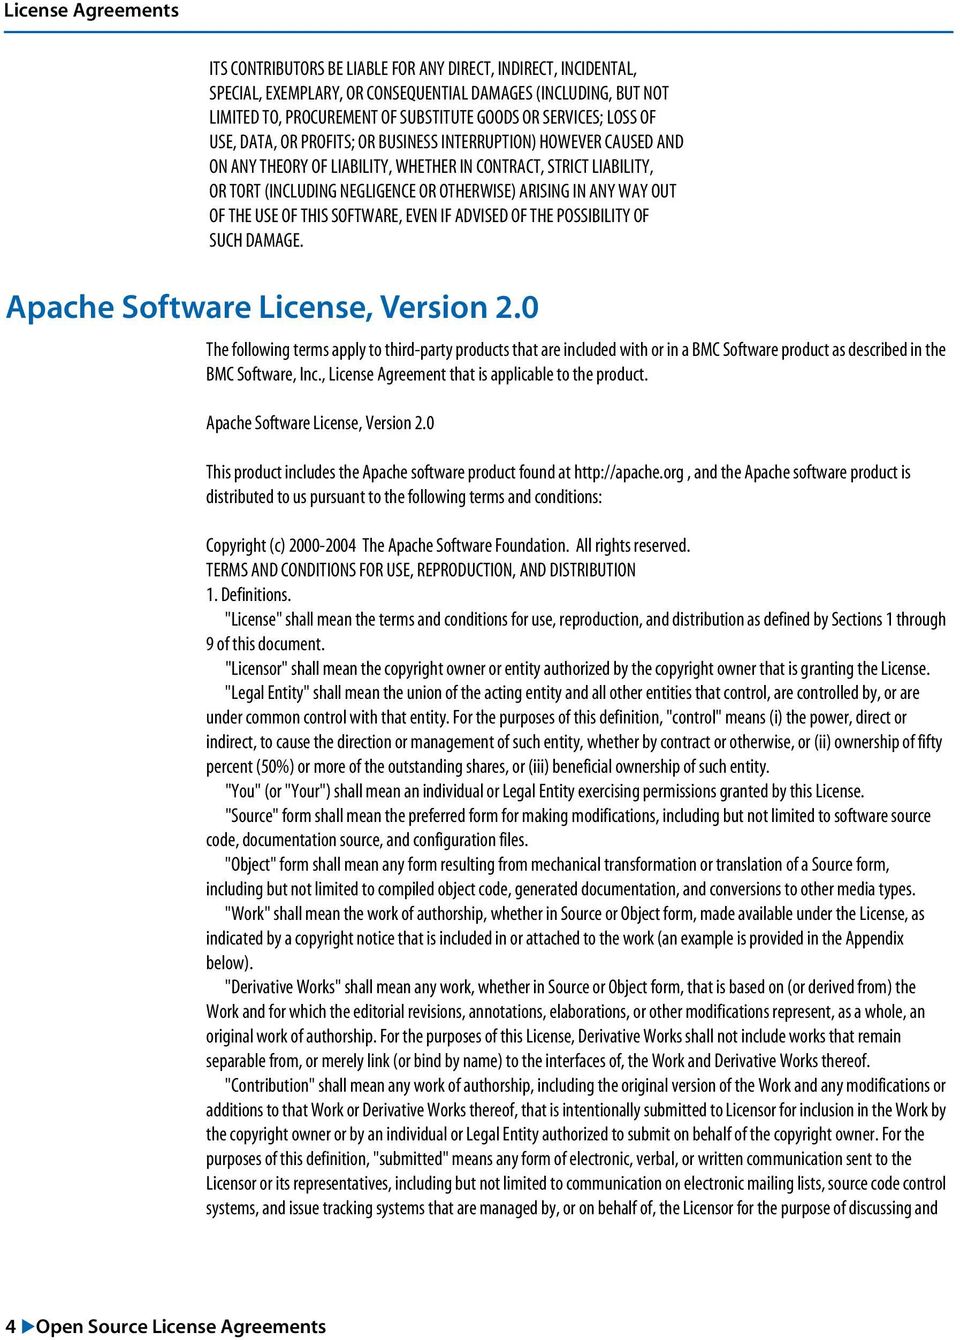 THE USE OF THIS SOFTWARE, EVEN IF ADVISED OF THE POSSIBILITY OF SUCH DAMAGE. Apache Software License, Version 2.